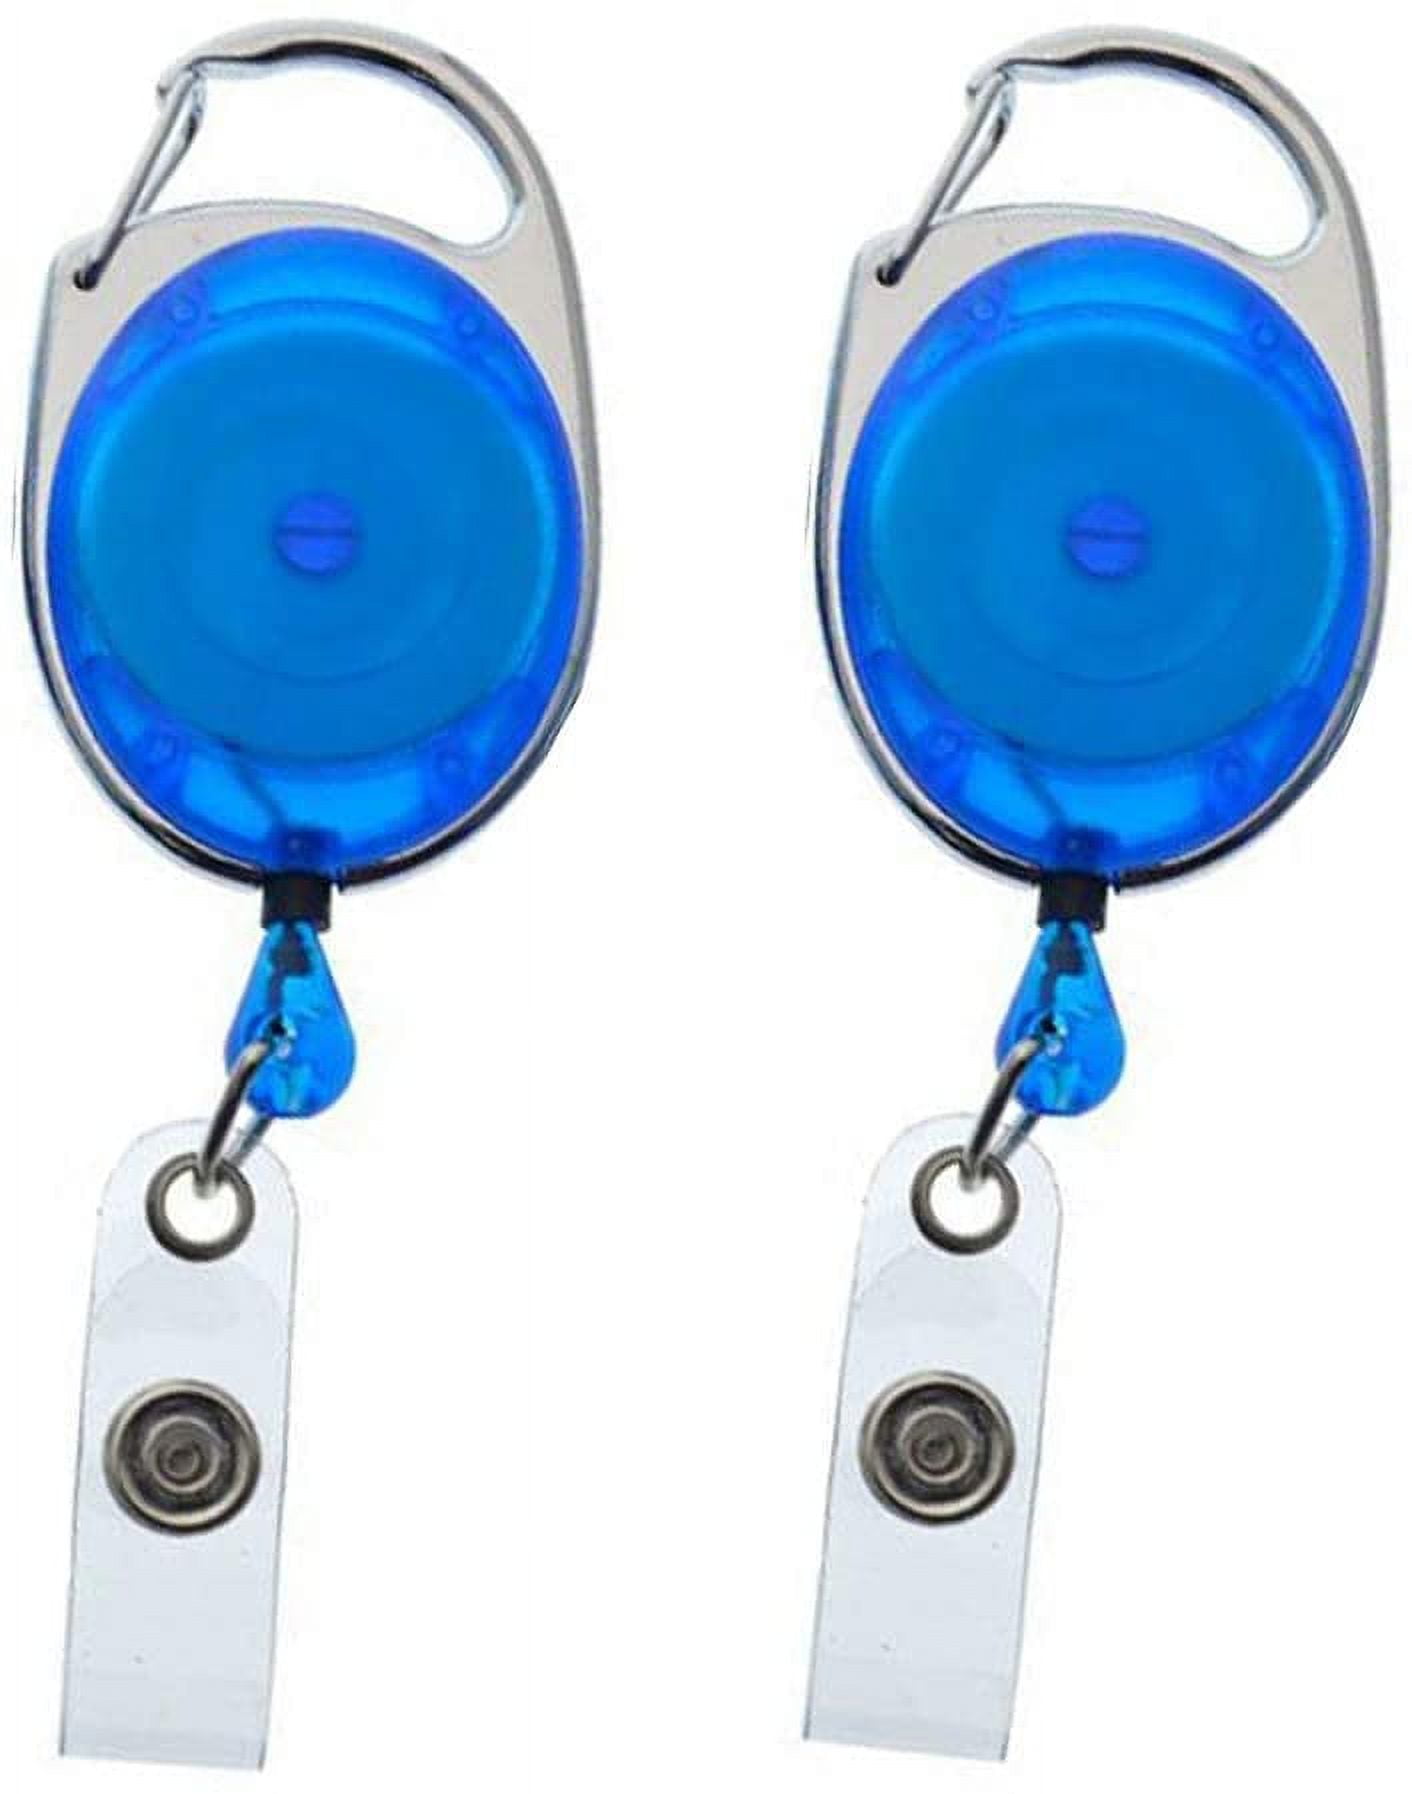 2 Pack - Specialist ID Premium Retractable Badge Reels with Carabiner Belt  Loop Clip and ID Holder Strap by Specialist ID (Royal Blue) 